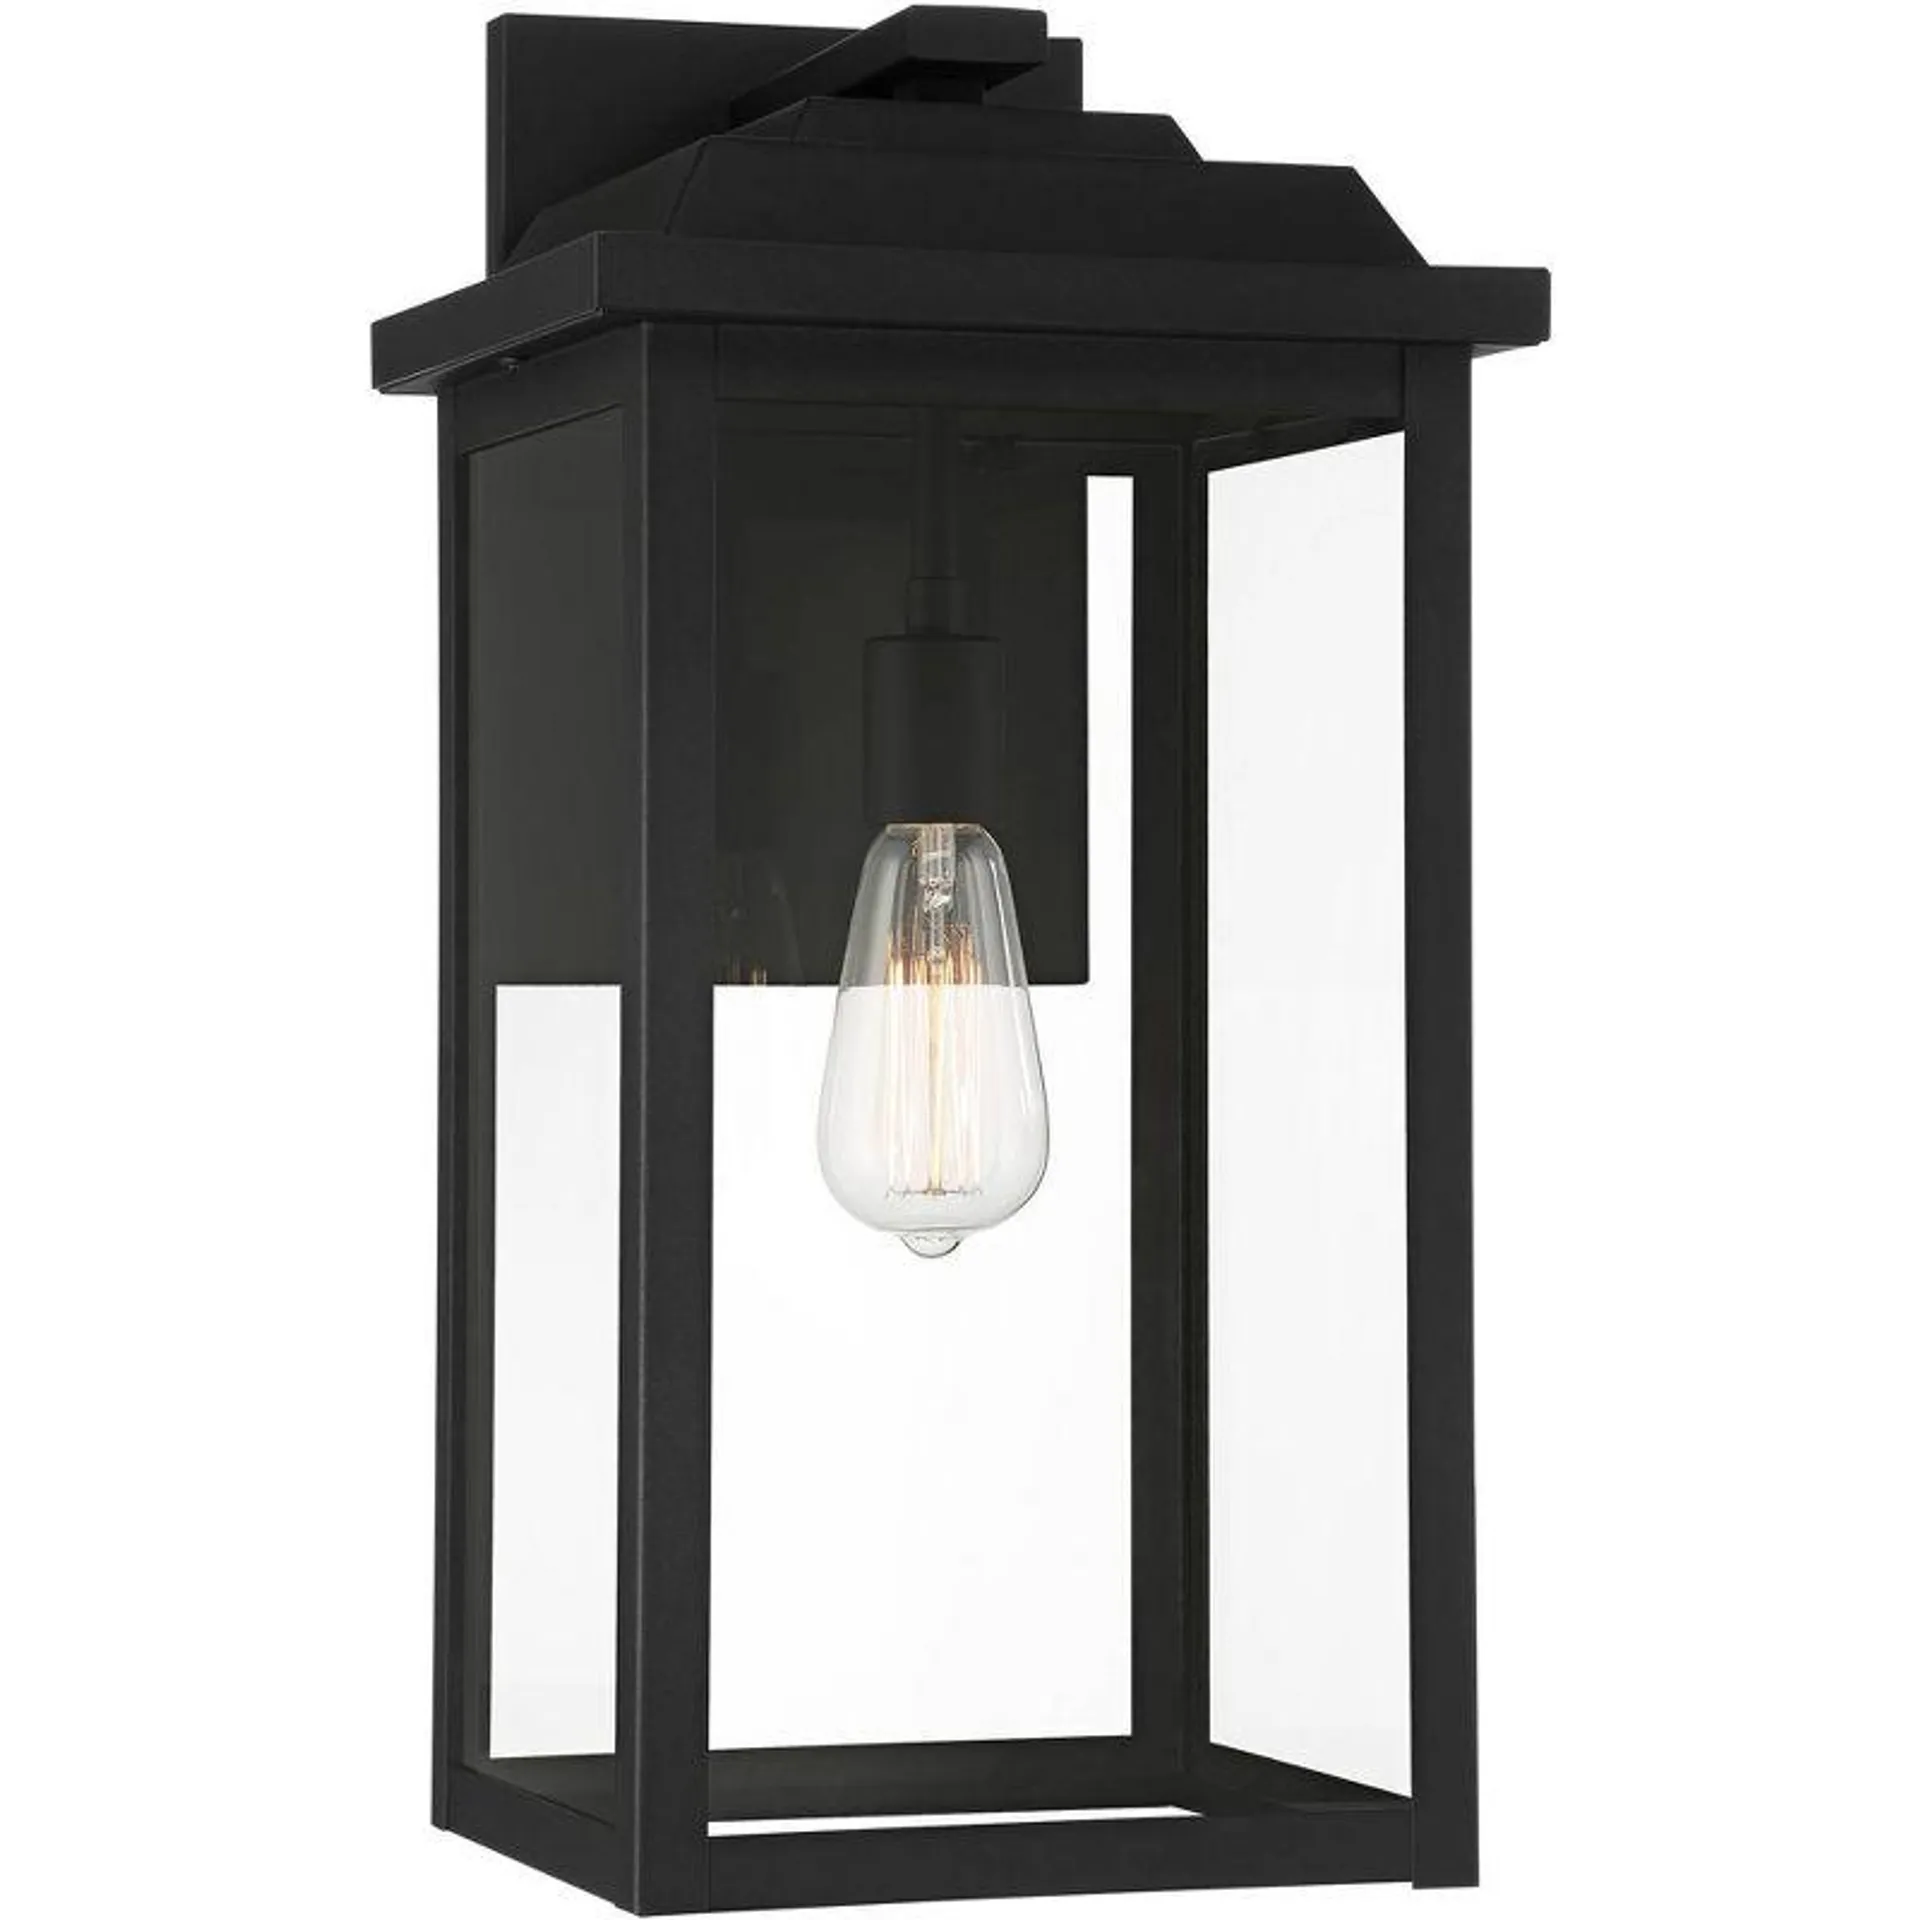 John Timberland Modern Outdoor Wall Light Fixture Textured Black 20 1/2" Clear Glass Panels for Exterior Barn Deck House Porch Yard Patio Outside Roof